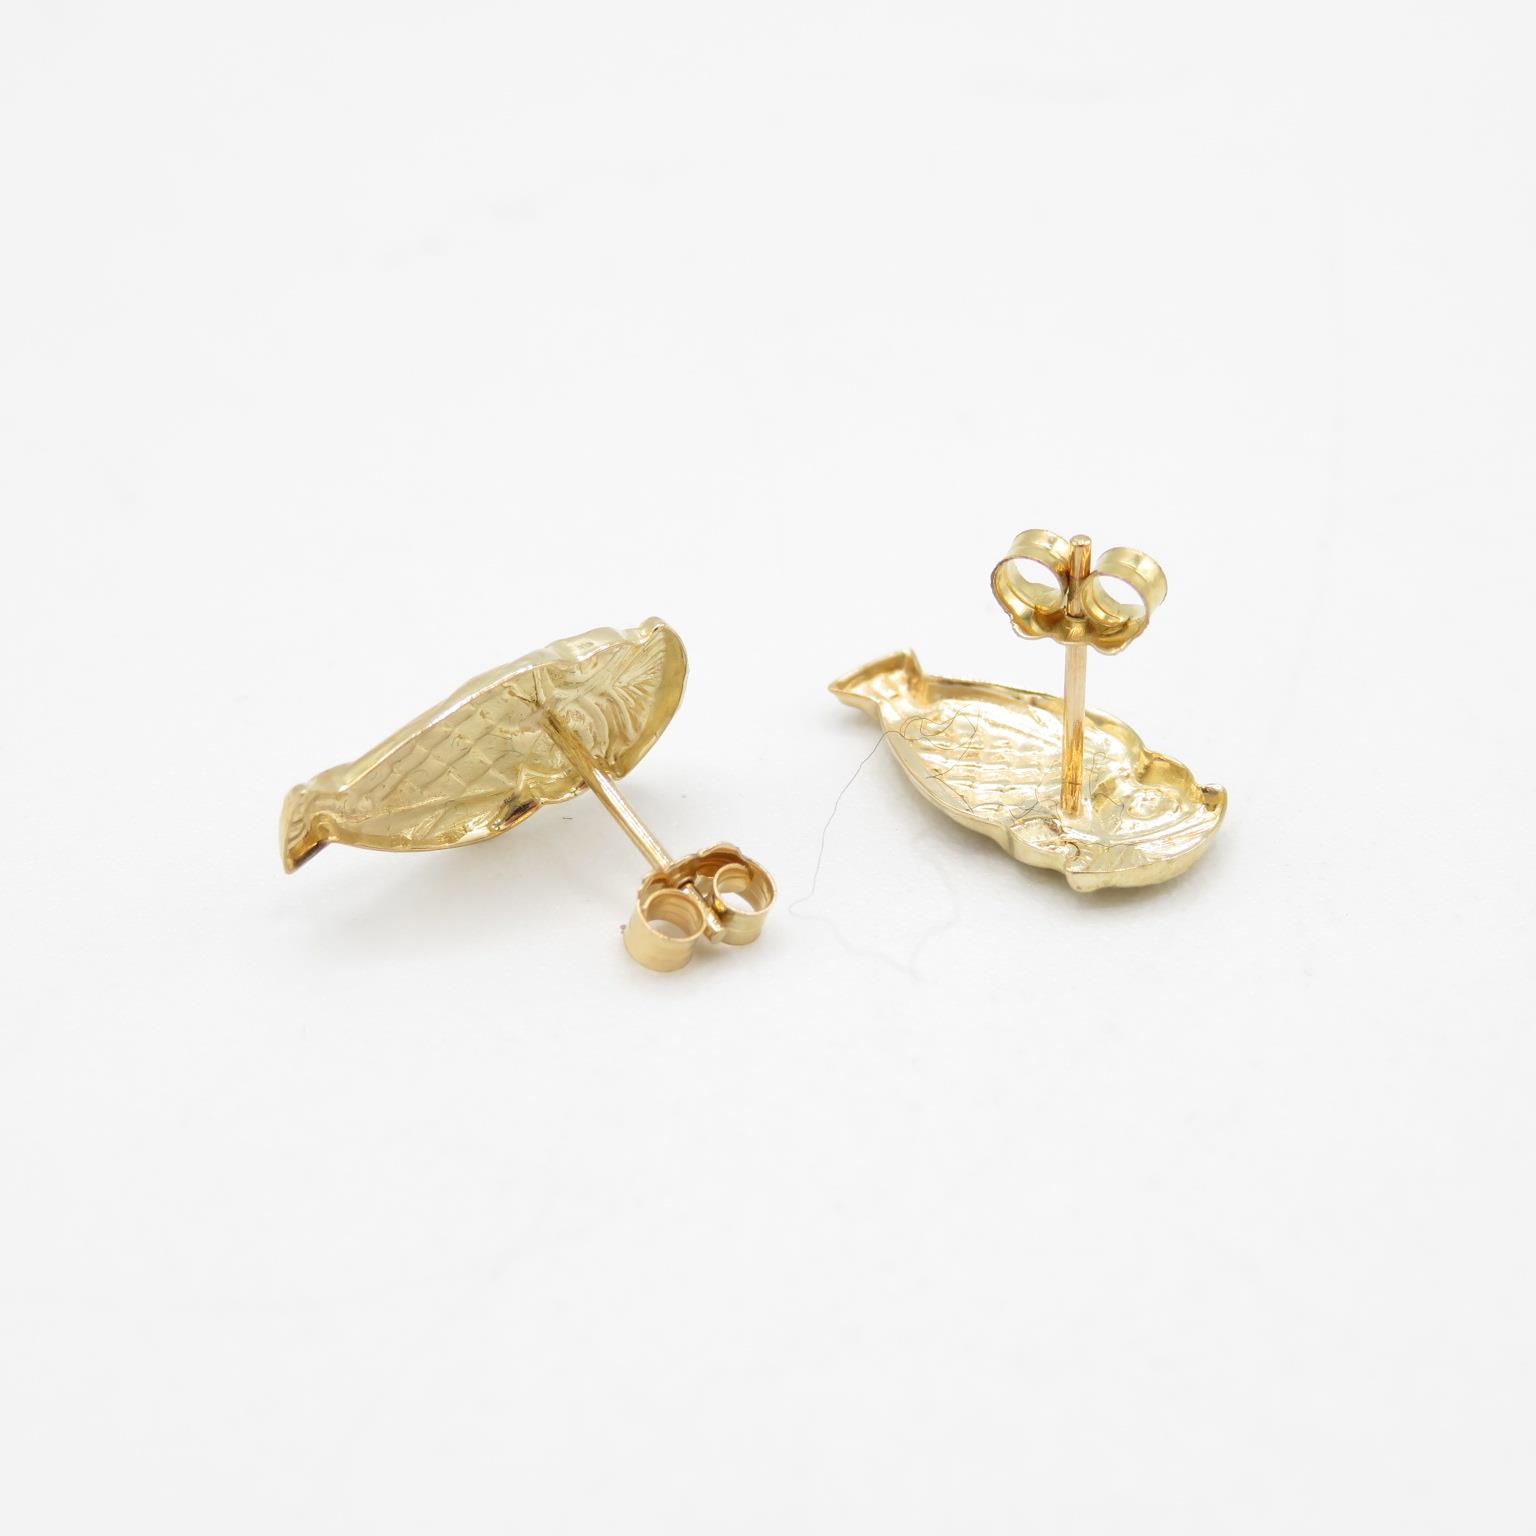 Boxed set of 9ct gold Owl earrings in WWF box - Image 4 of 4